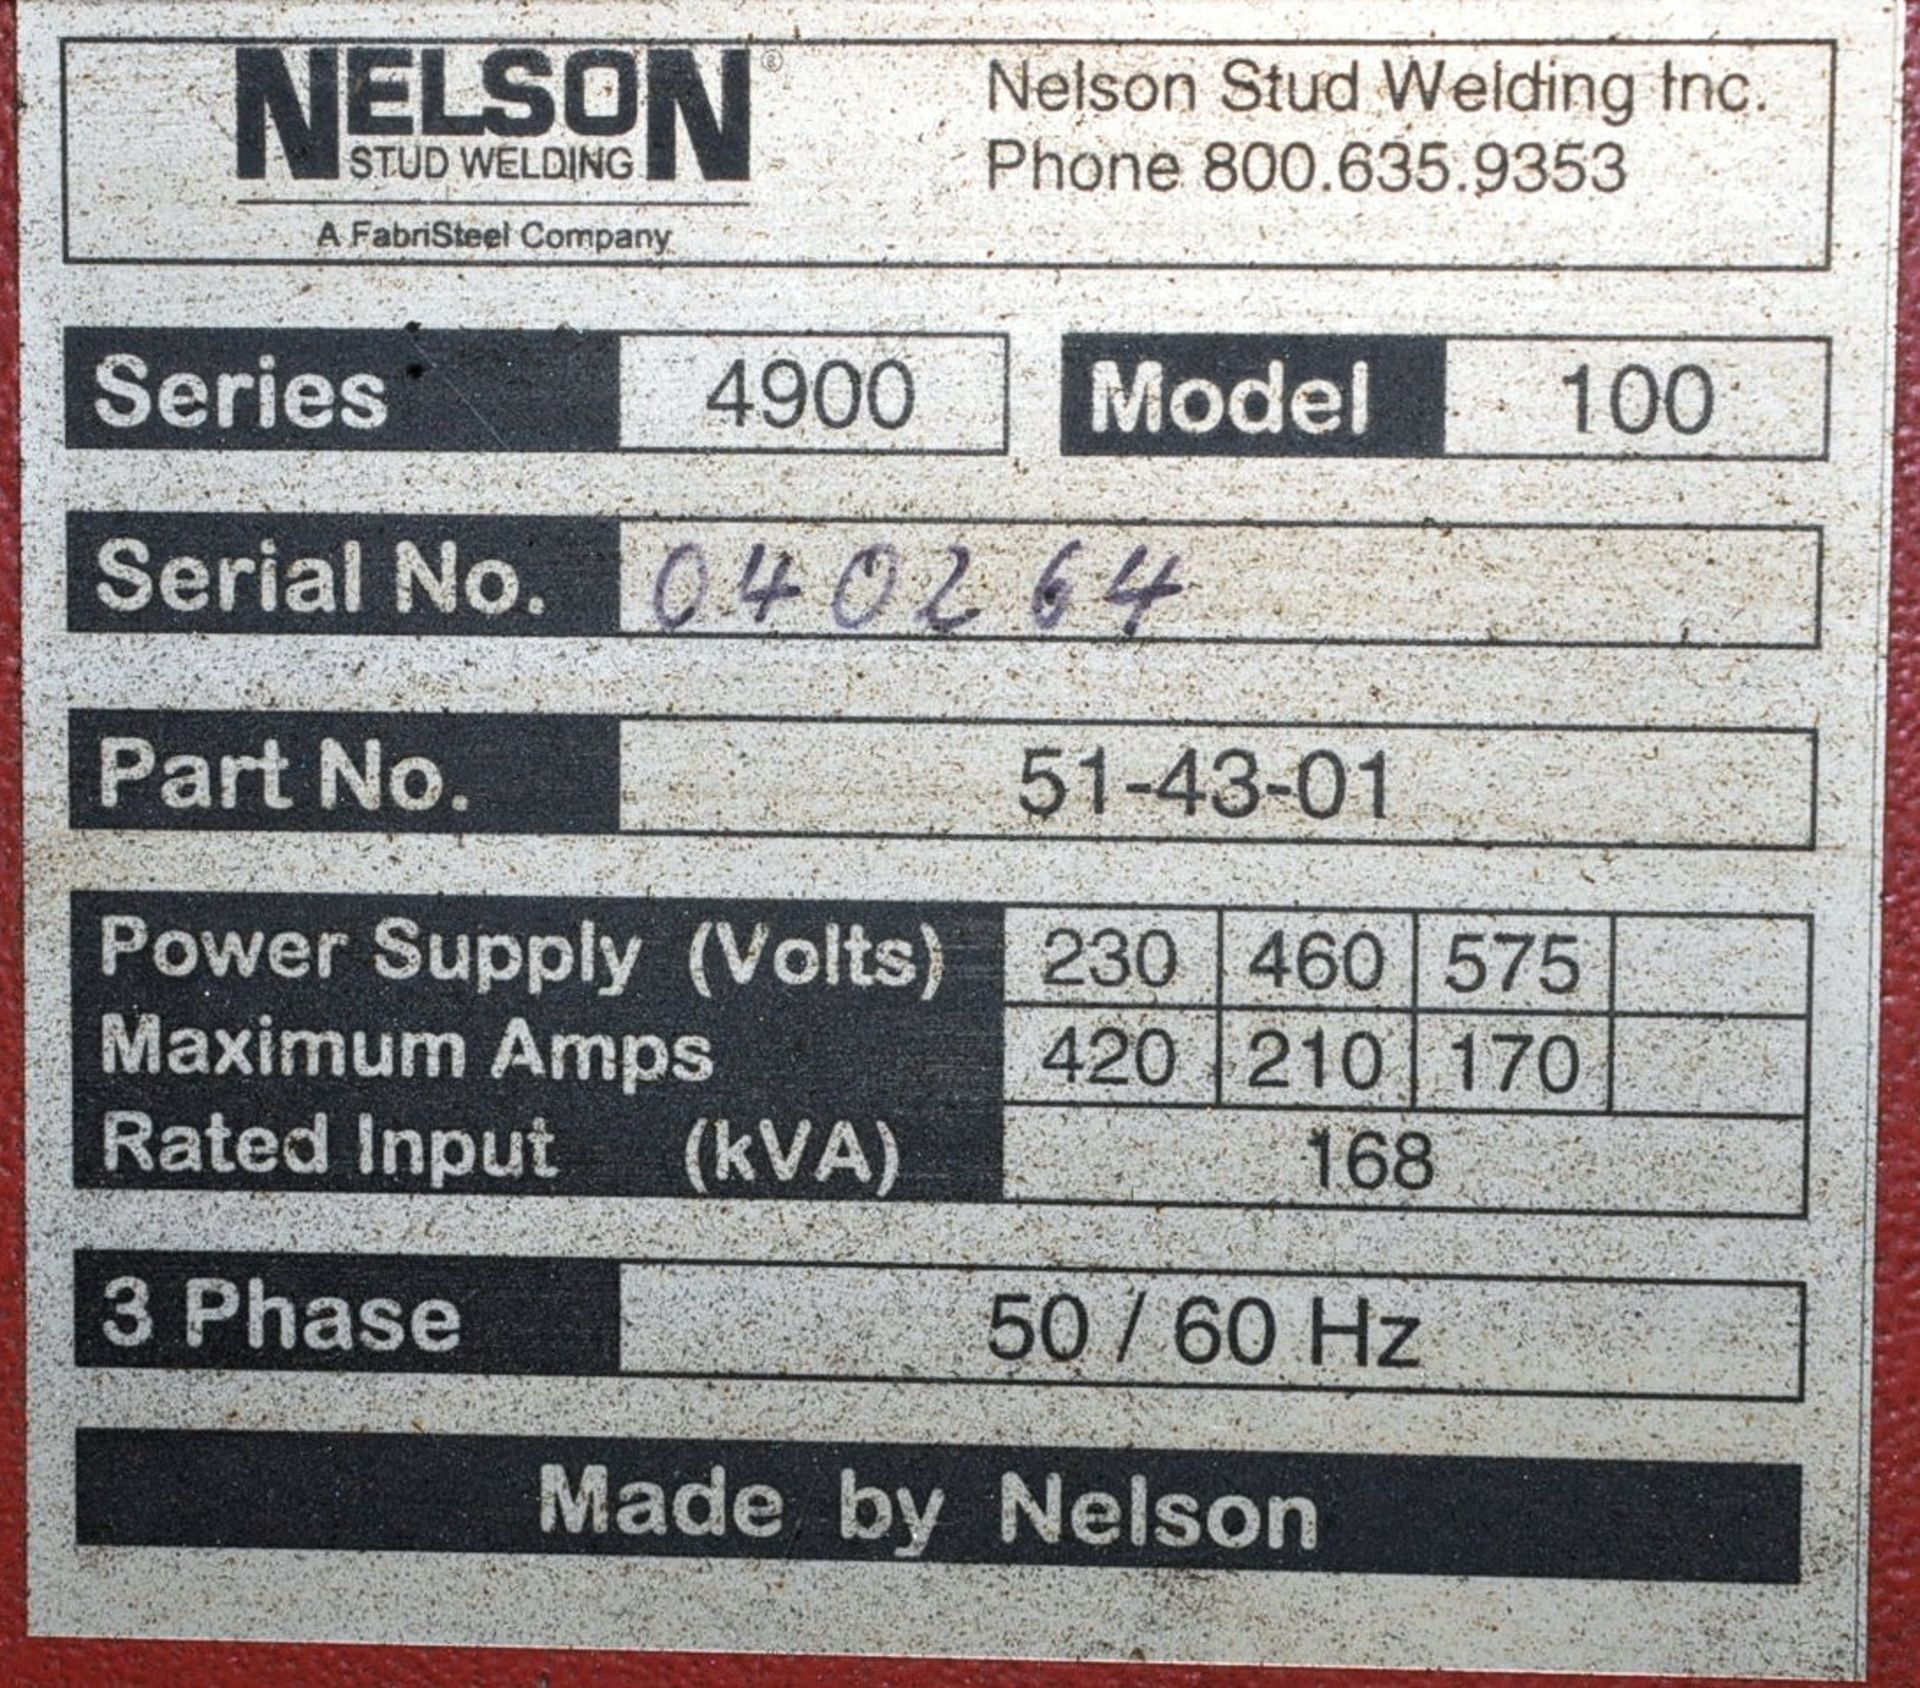 Nelson Series 4900, Model 100, Stud Welder, S/n 040264, with Gun and Leads, Portable - Image 2 of 2